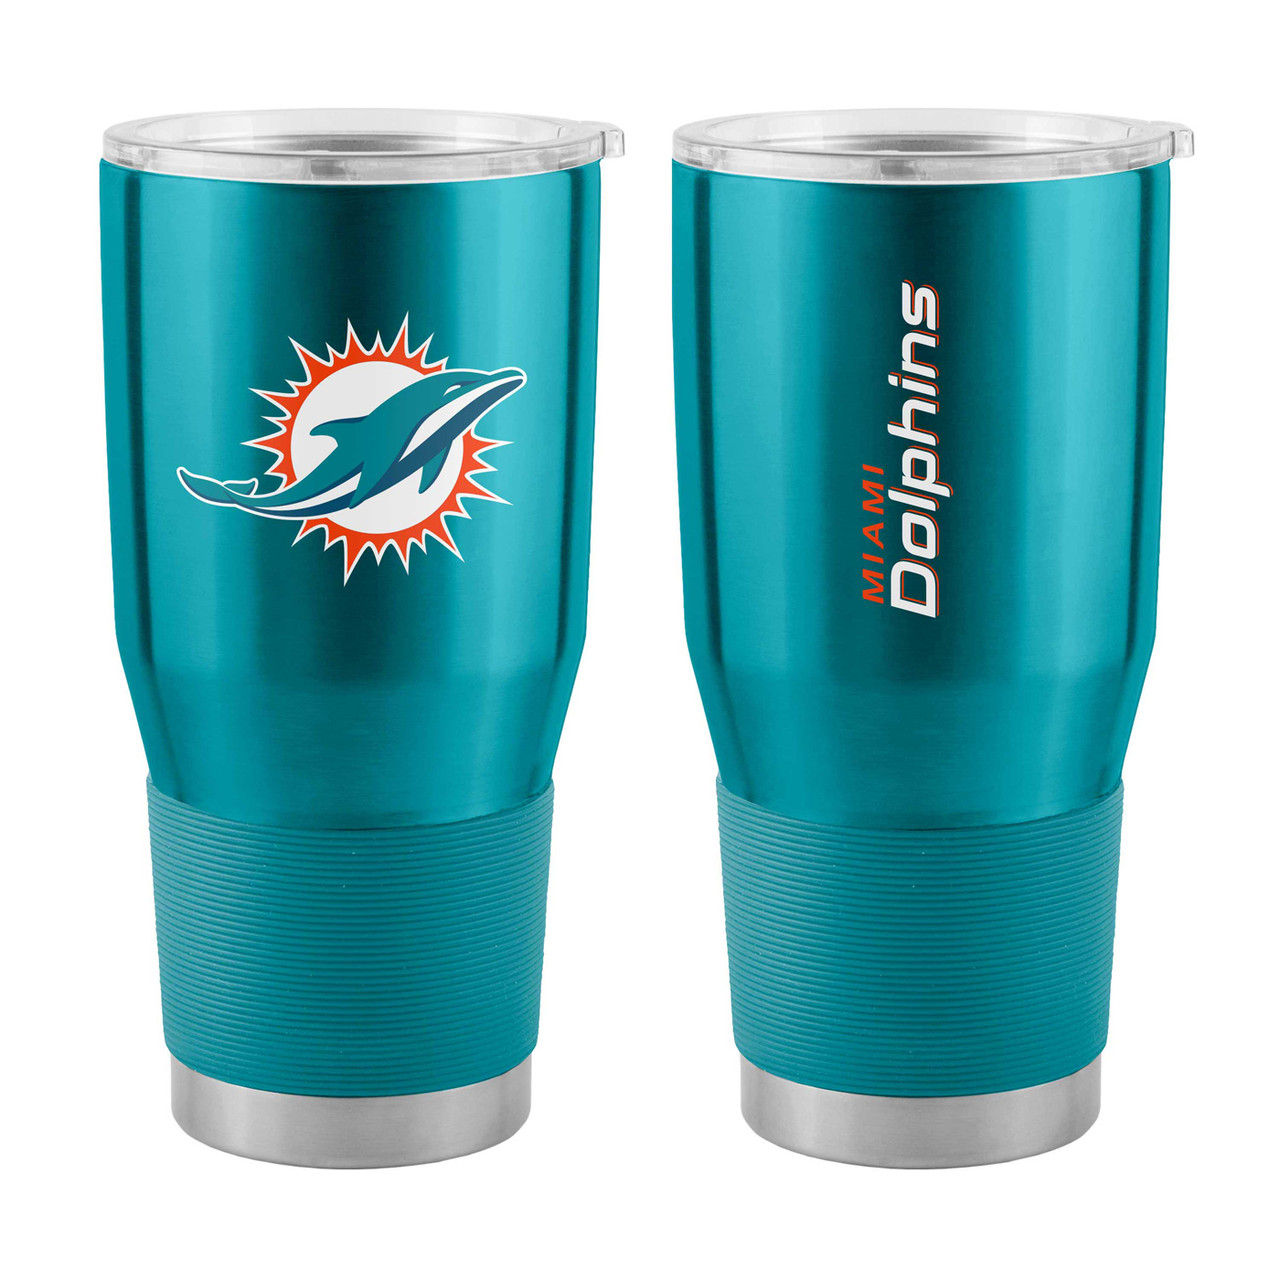 NFL Miami Dolphin Cruiser Insulated Tumbler Set with Flip Lid and Straw -  30oz